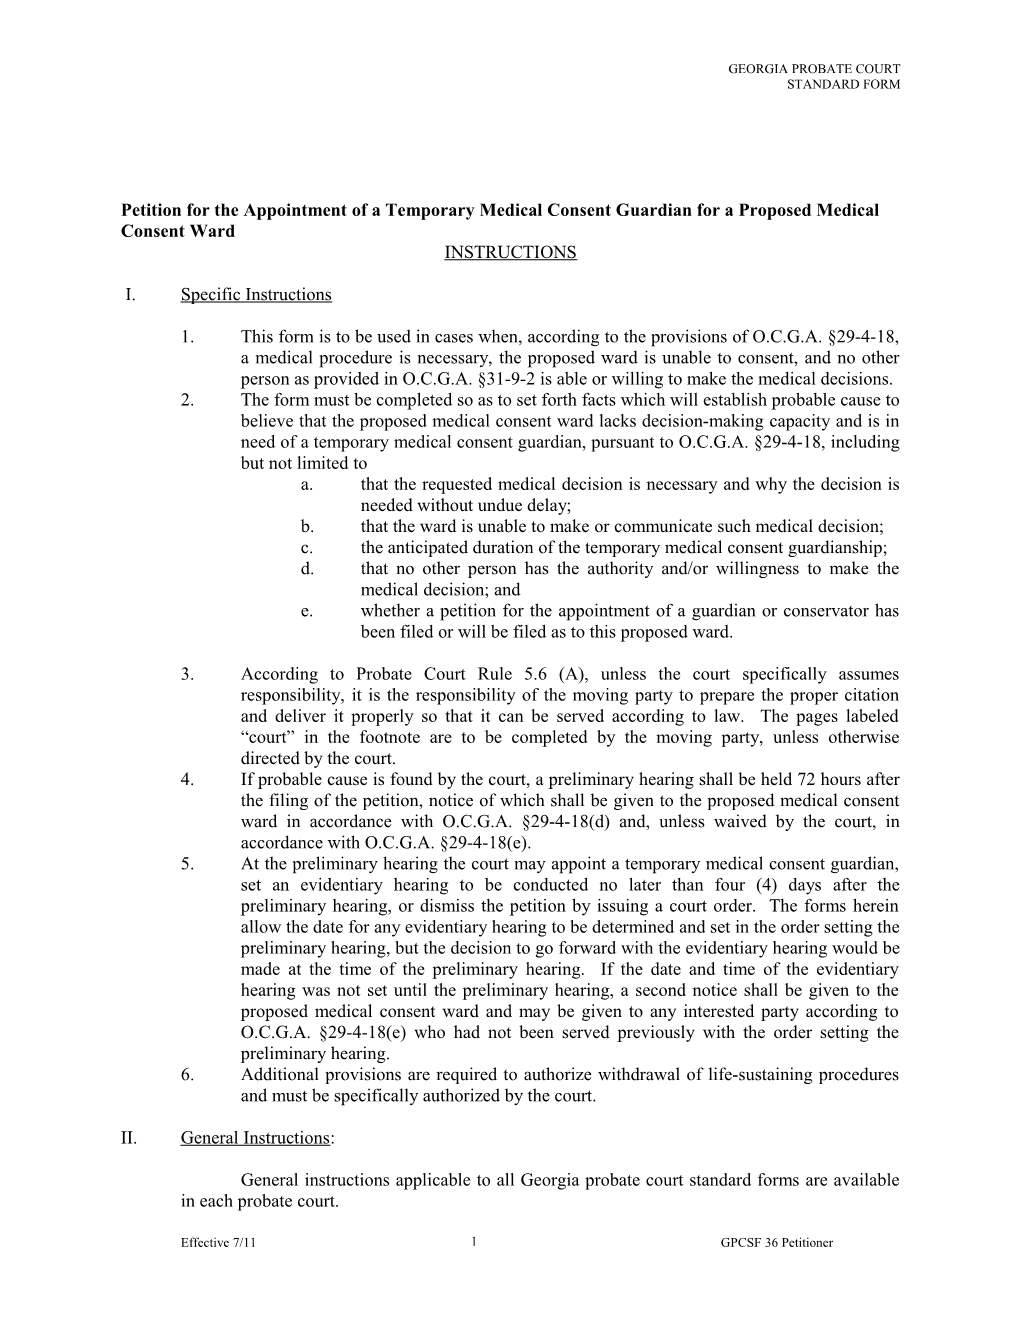 Petition for the Appointment of a Temporary Medical Consent Guardian for a Proposed Medical